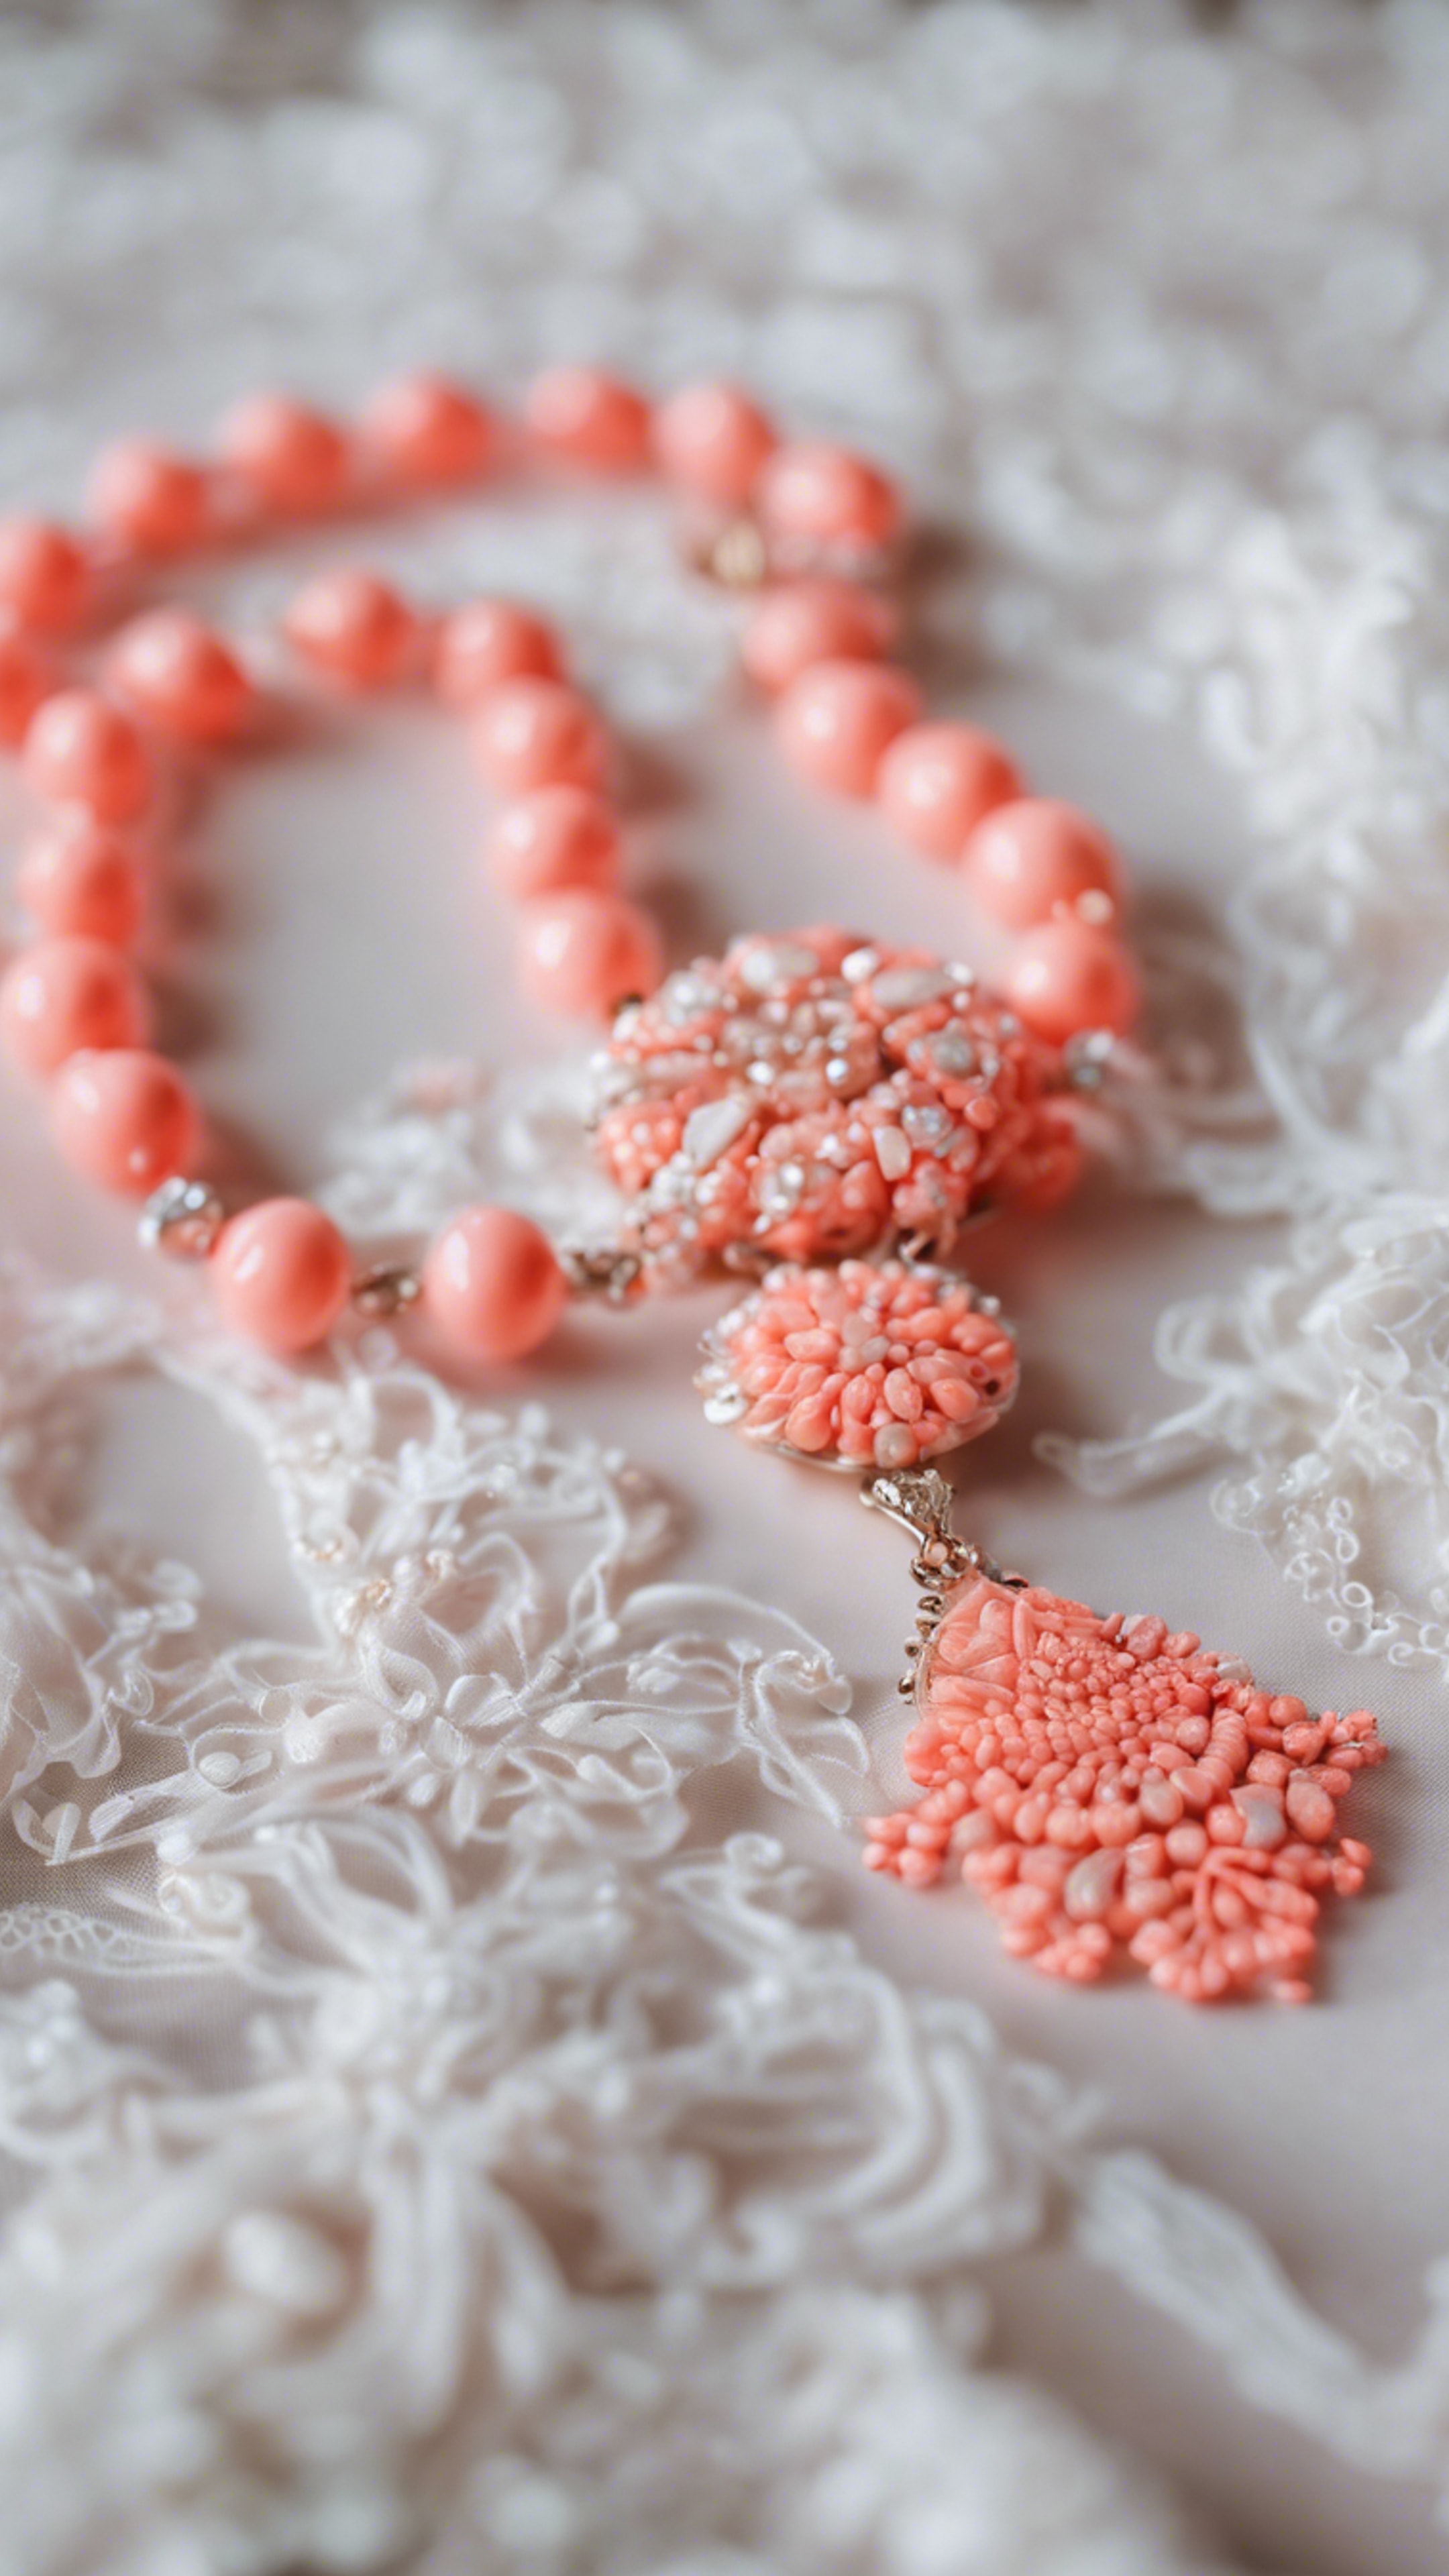 A preppy neon coral necklace against a white lace dress. Tapetai[7558fb99fbaf41faa5f9]